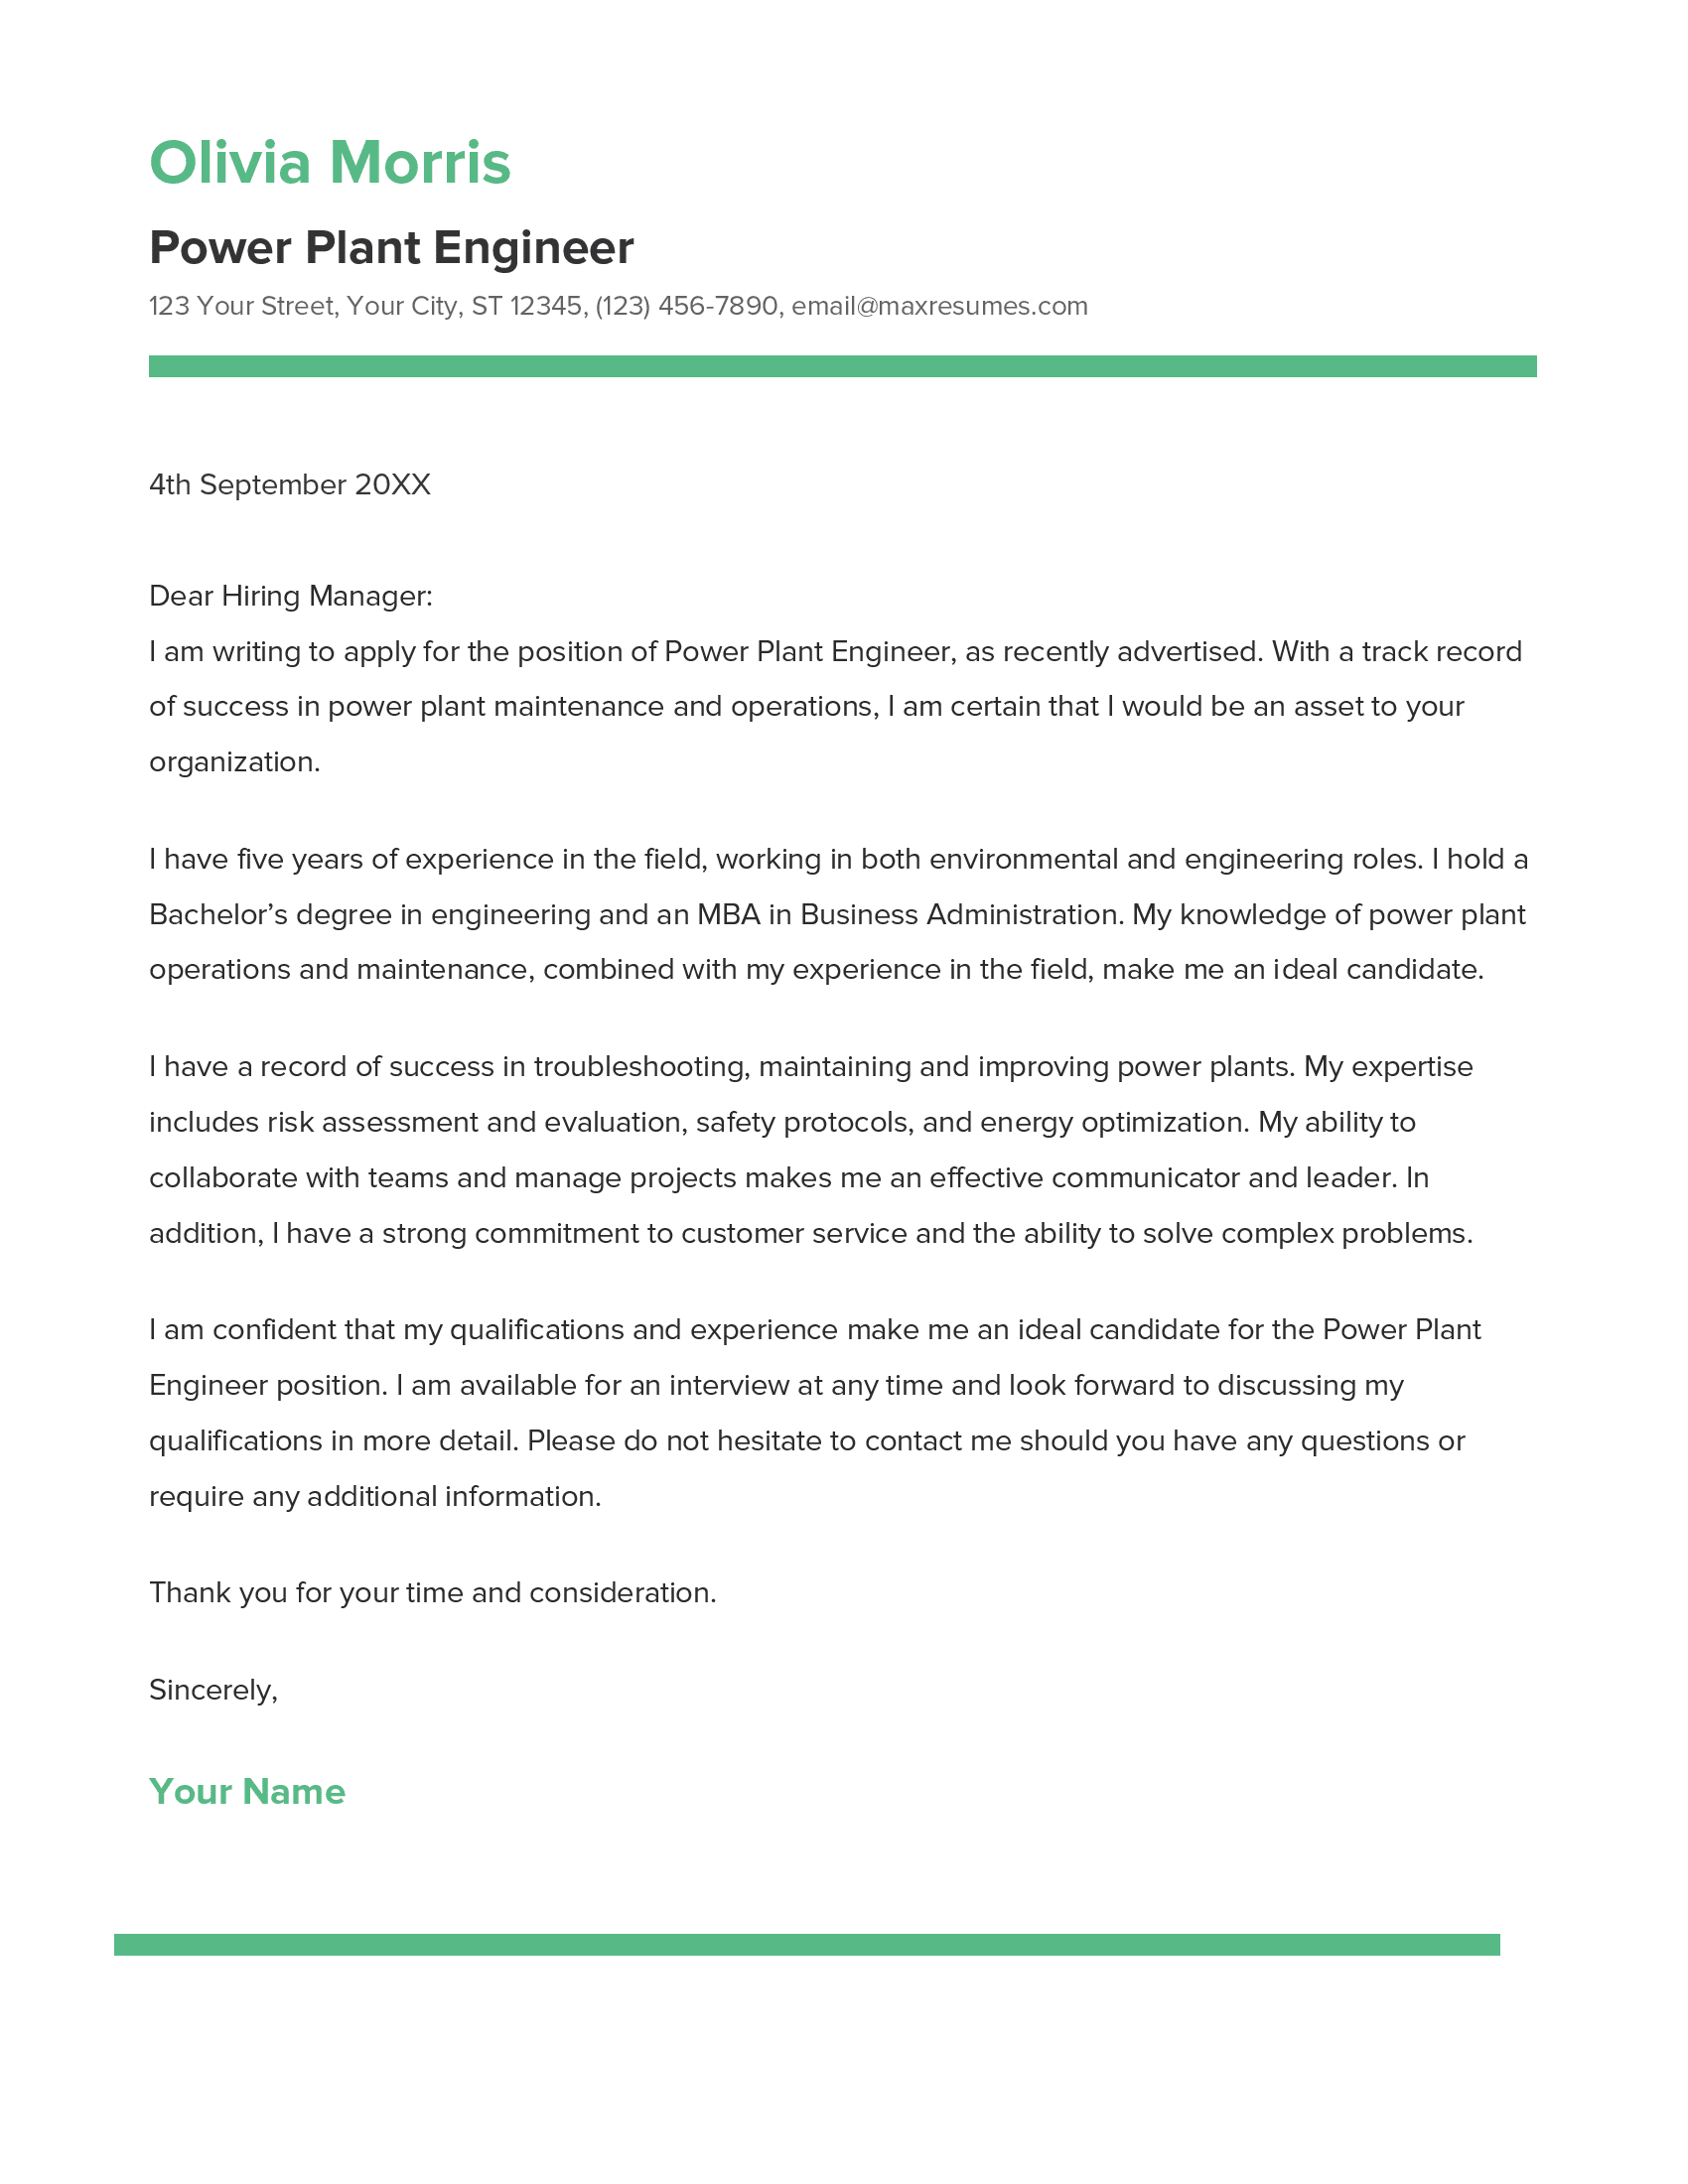 Power Plant Engineer Cover Letter Example